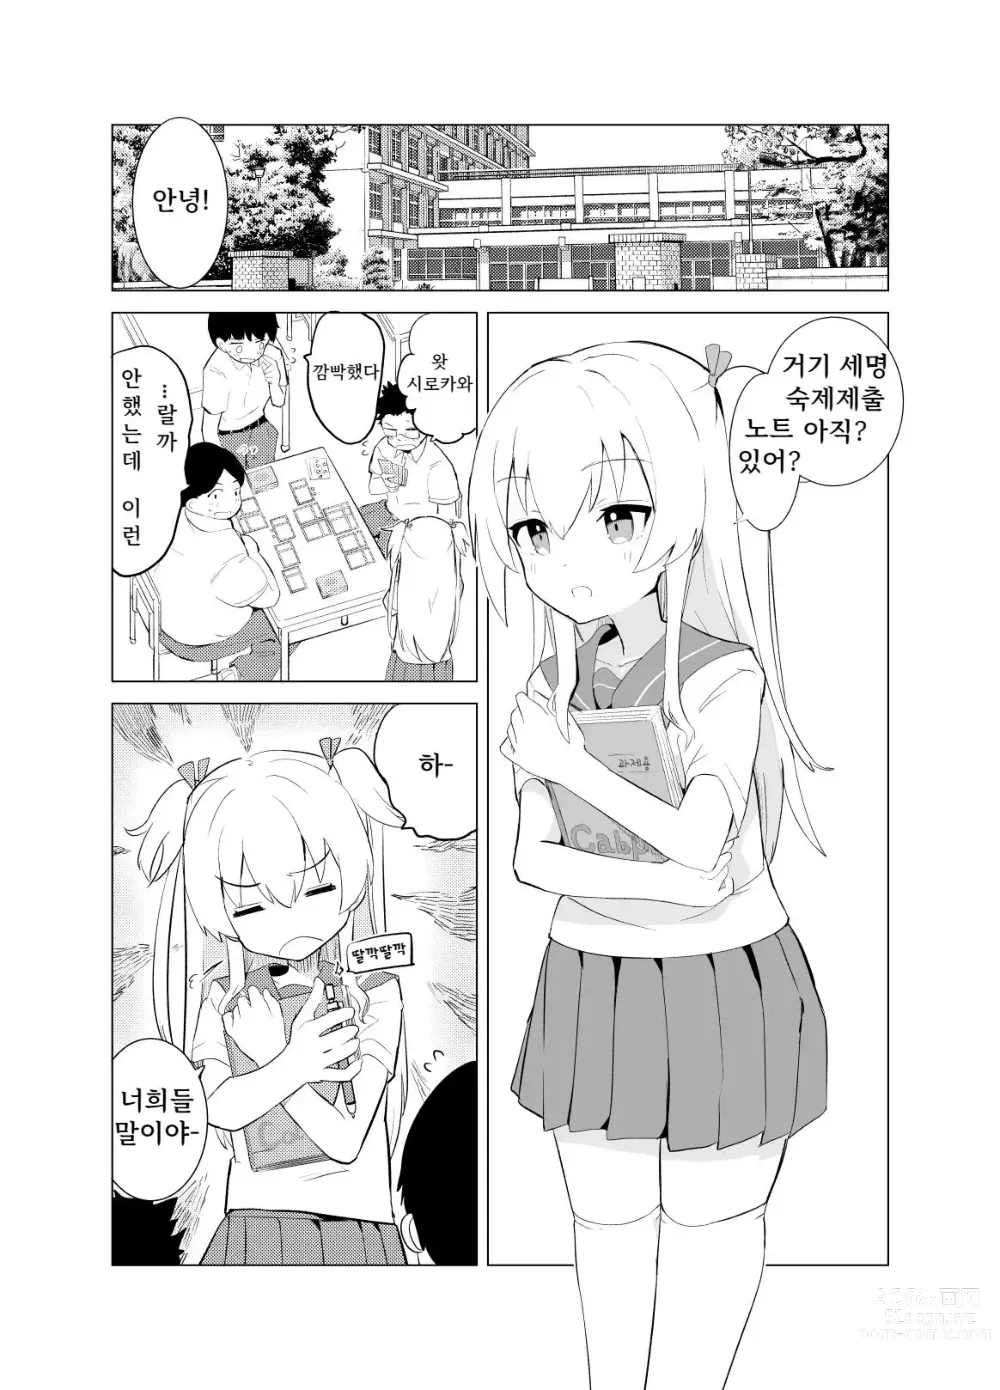 Page 3 of doujinshi S.S.S.Di part 1